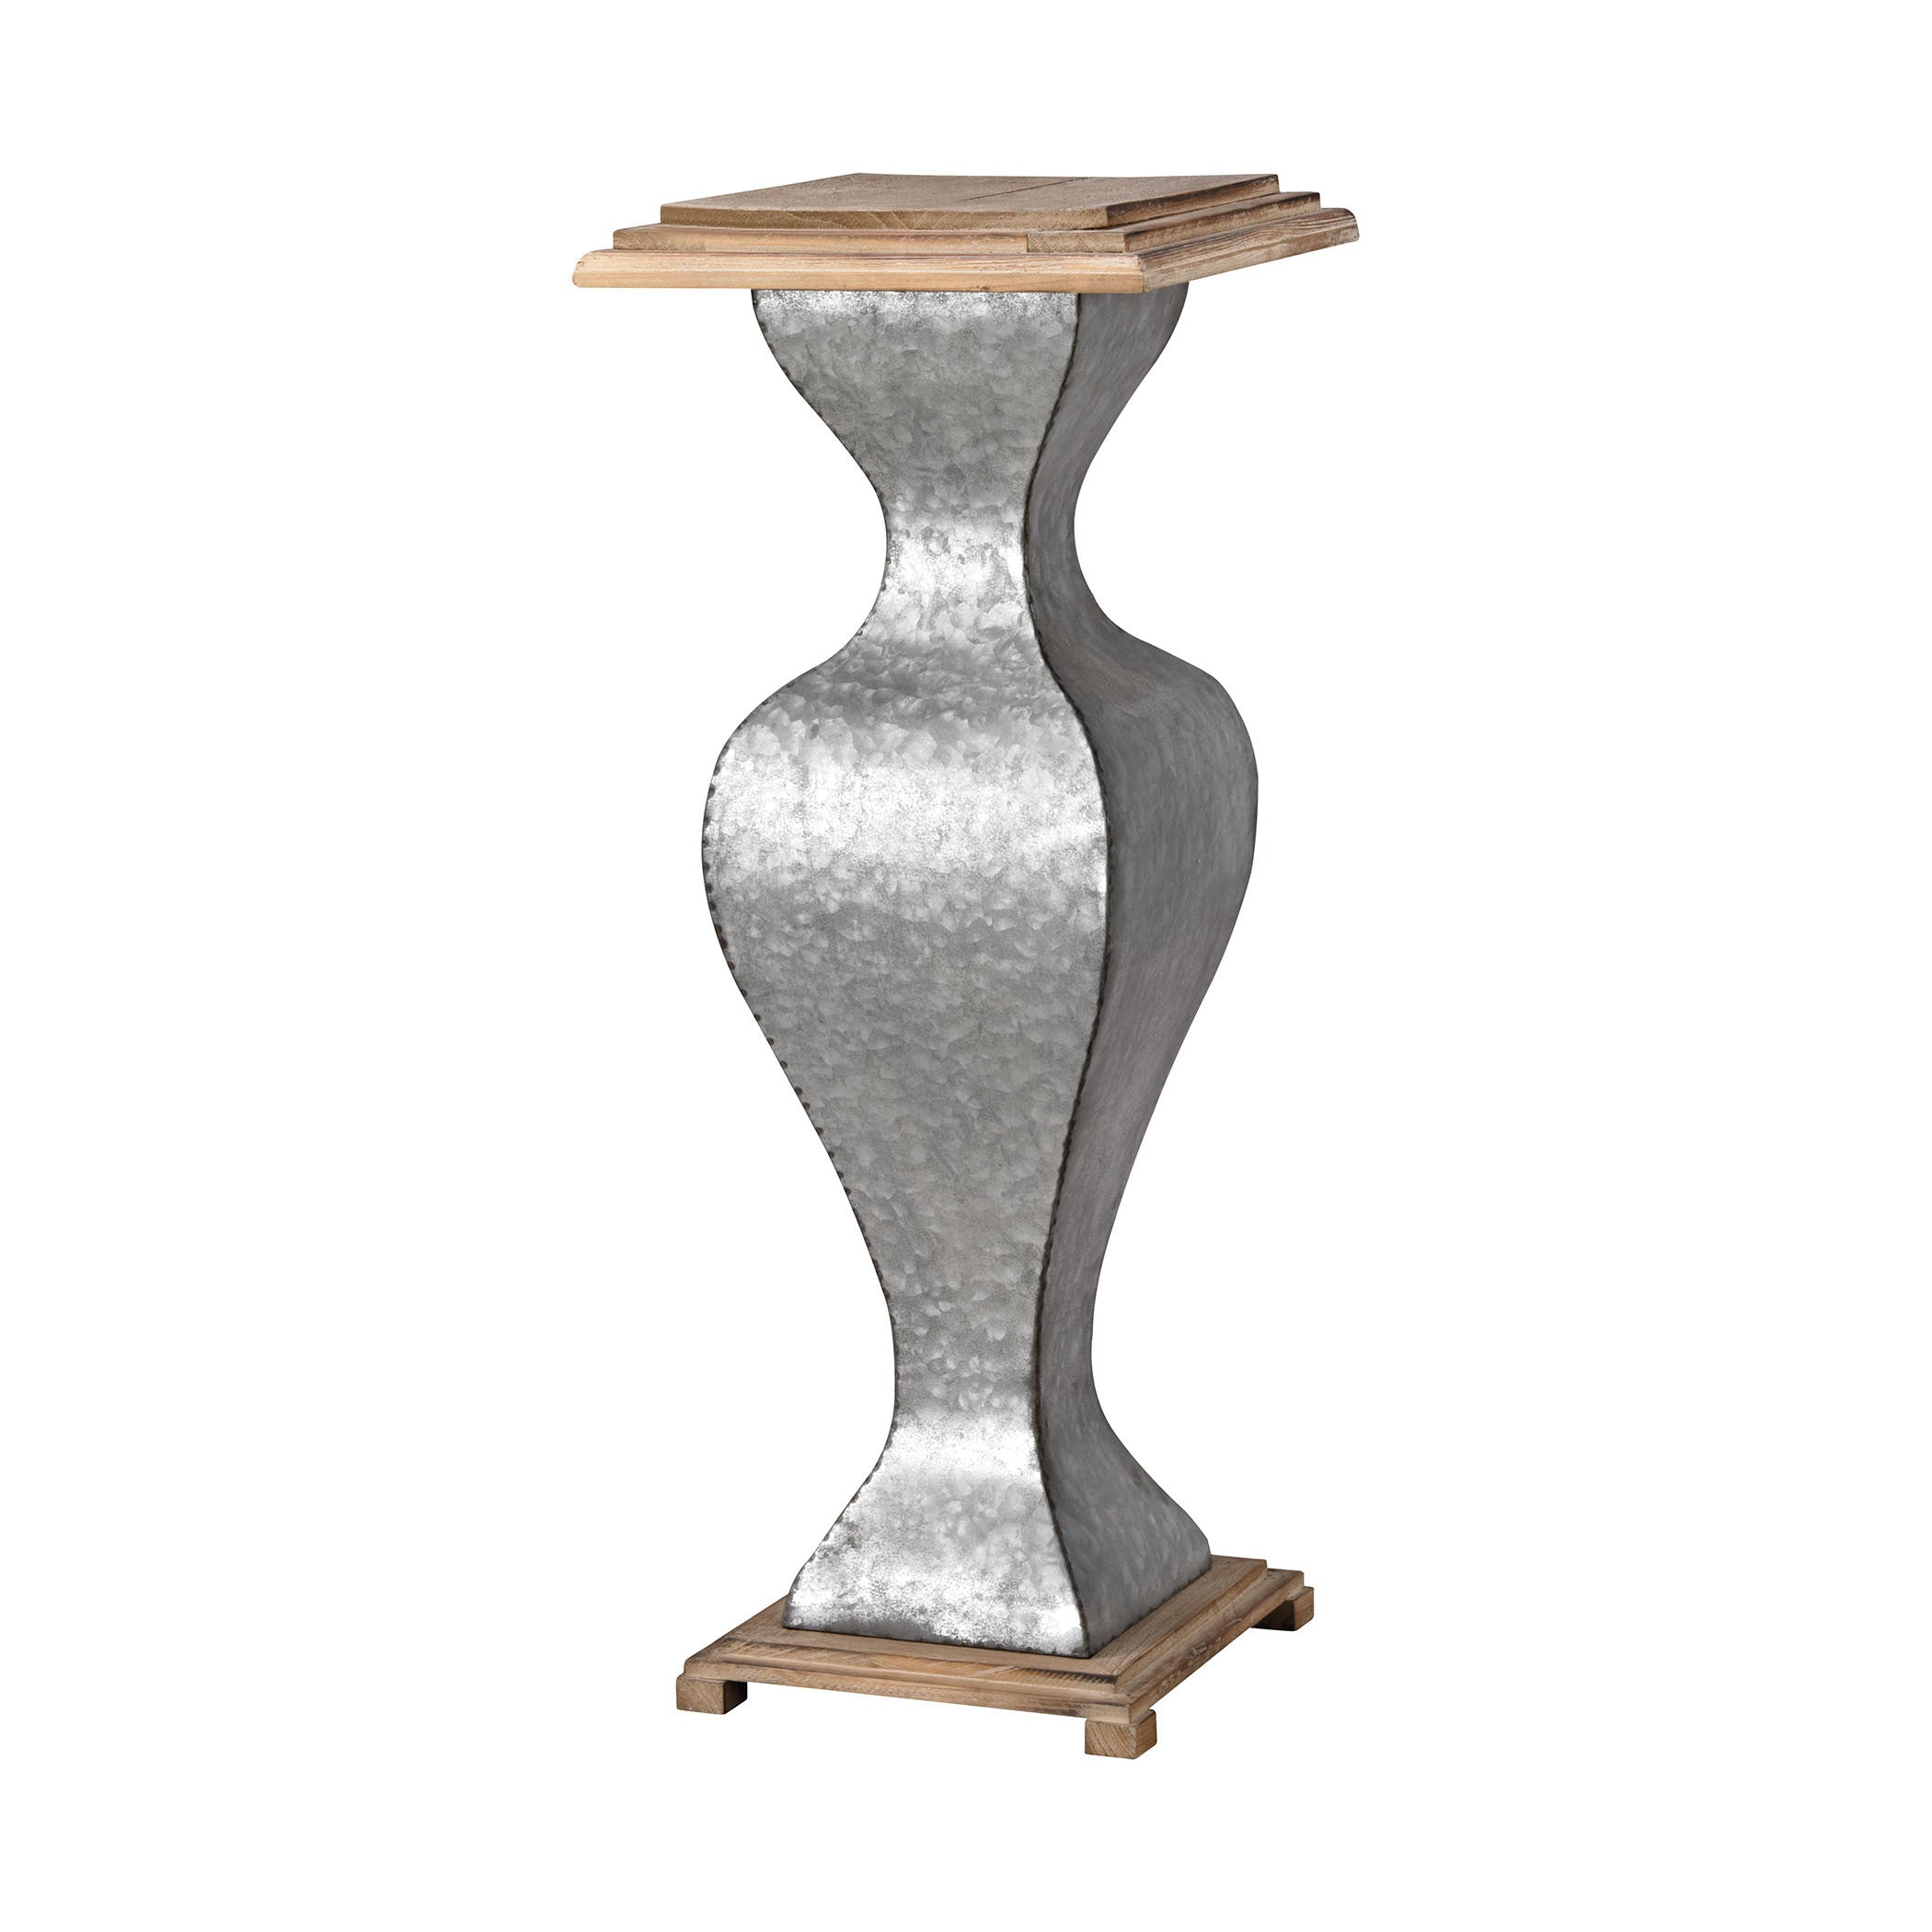 Guildmaster Gui-326-8702 Soissons Collection Galvanized Tin Finish Table